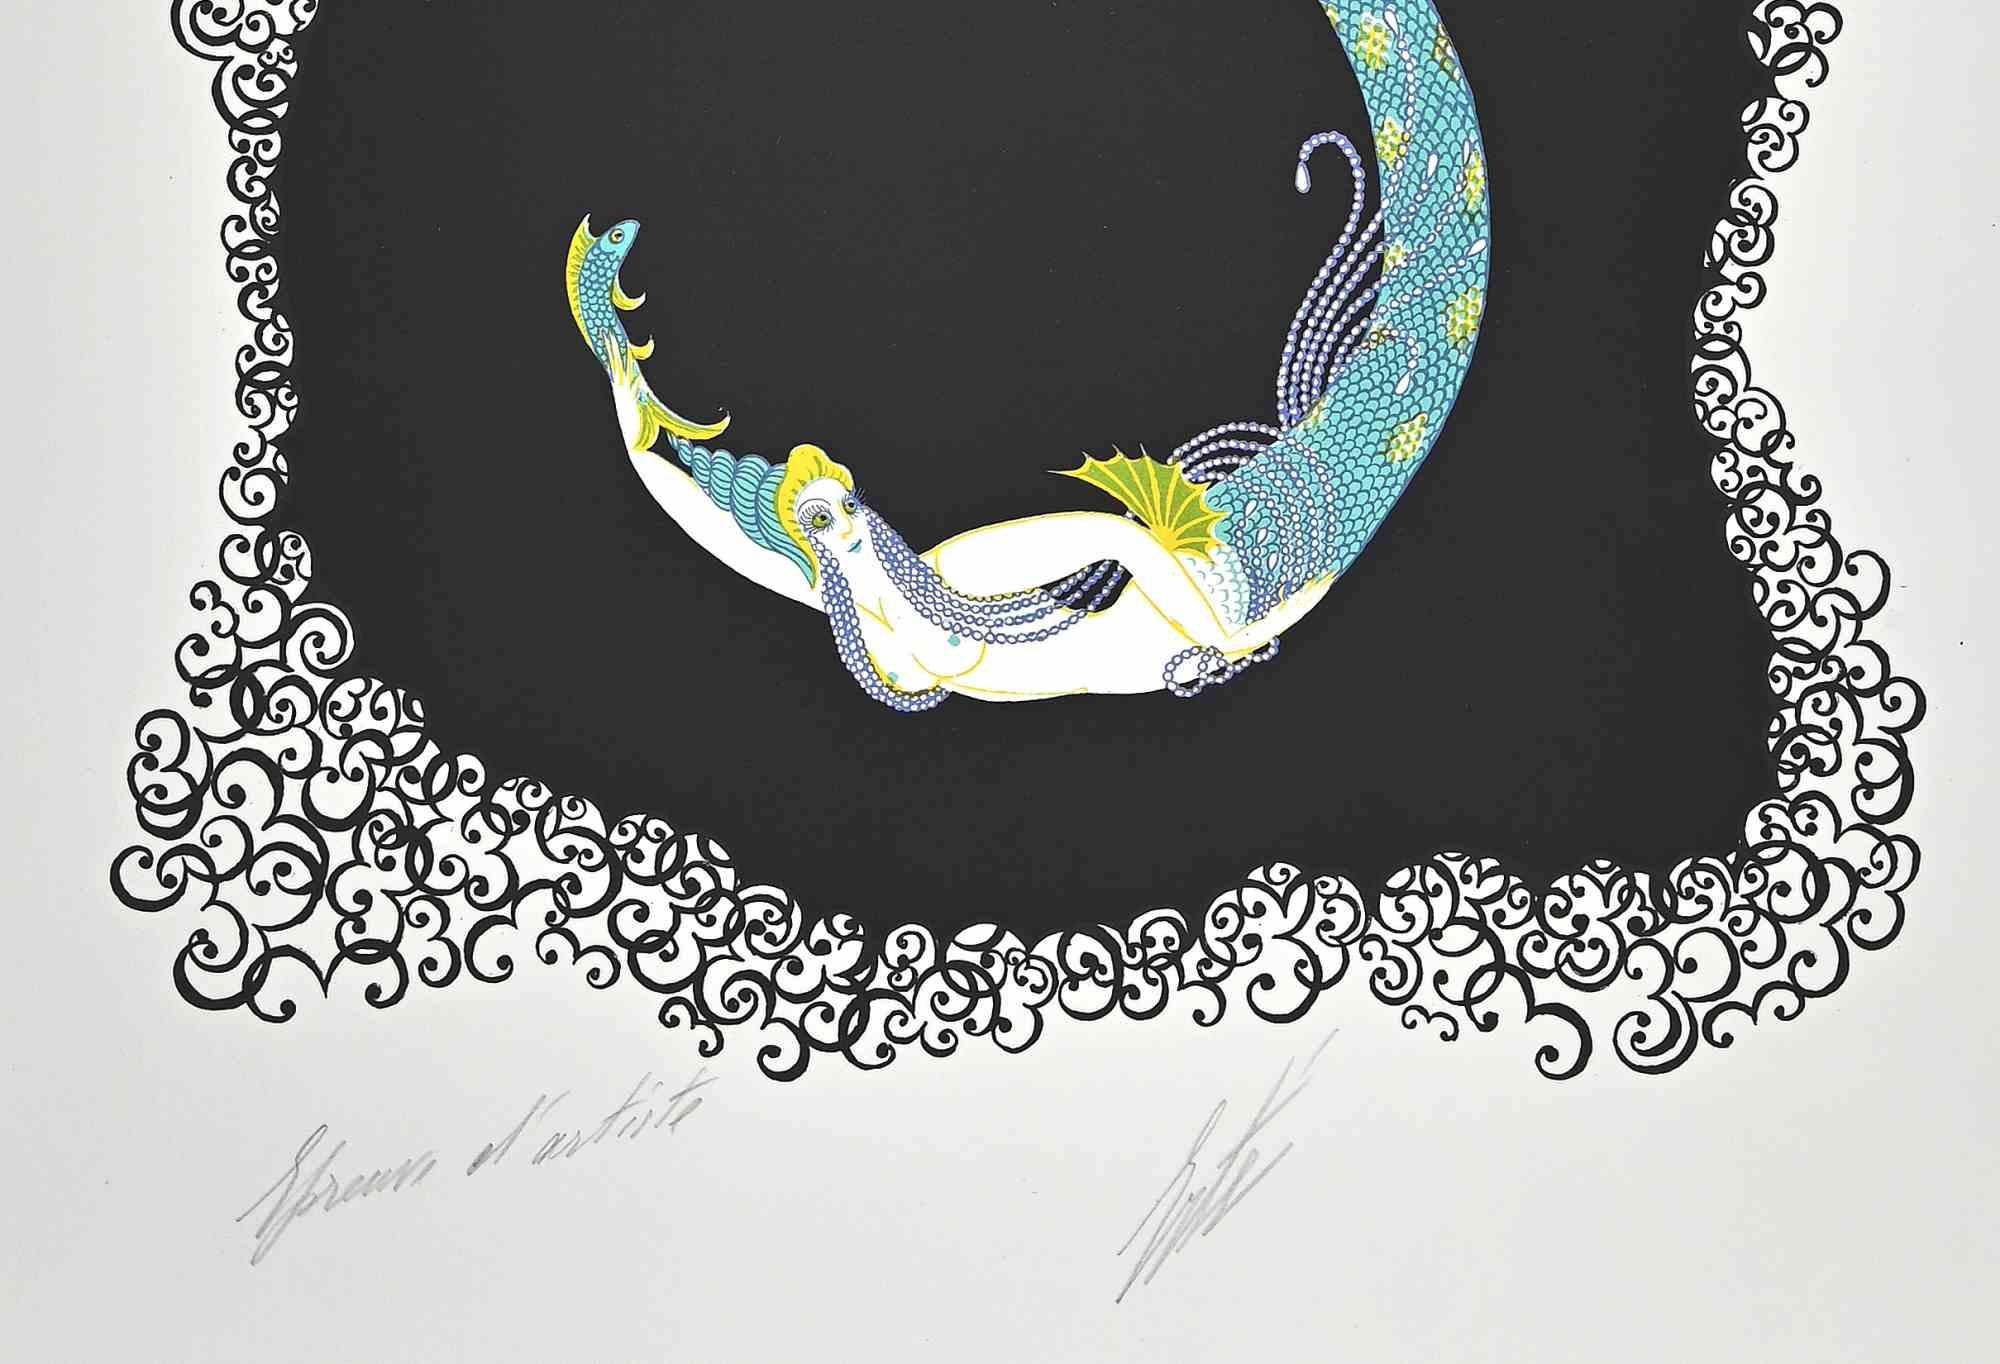 Le 3 is a contemporary artwork realized in 1968 by Erté (Romain de Tirtoff).

Mixed colored lithograph on paper.

The artwork is from the Series 